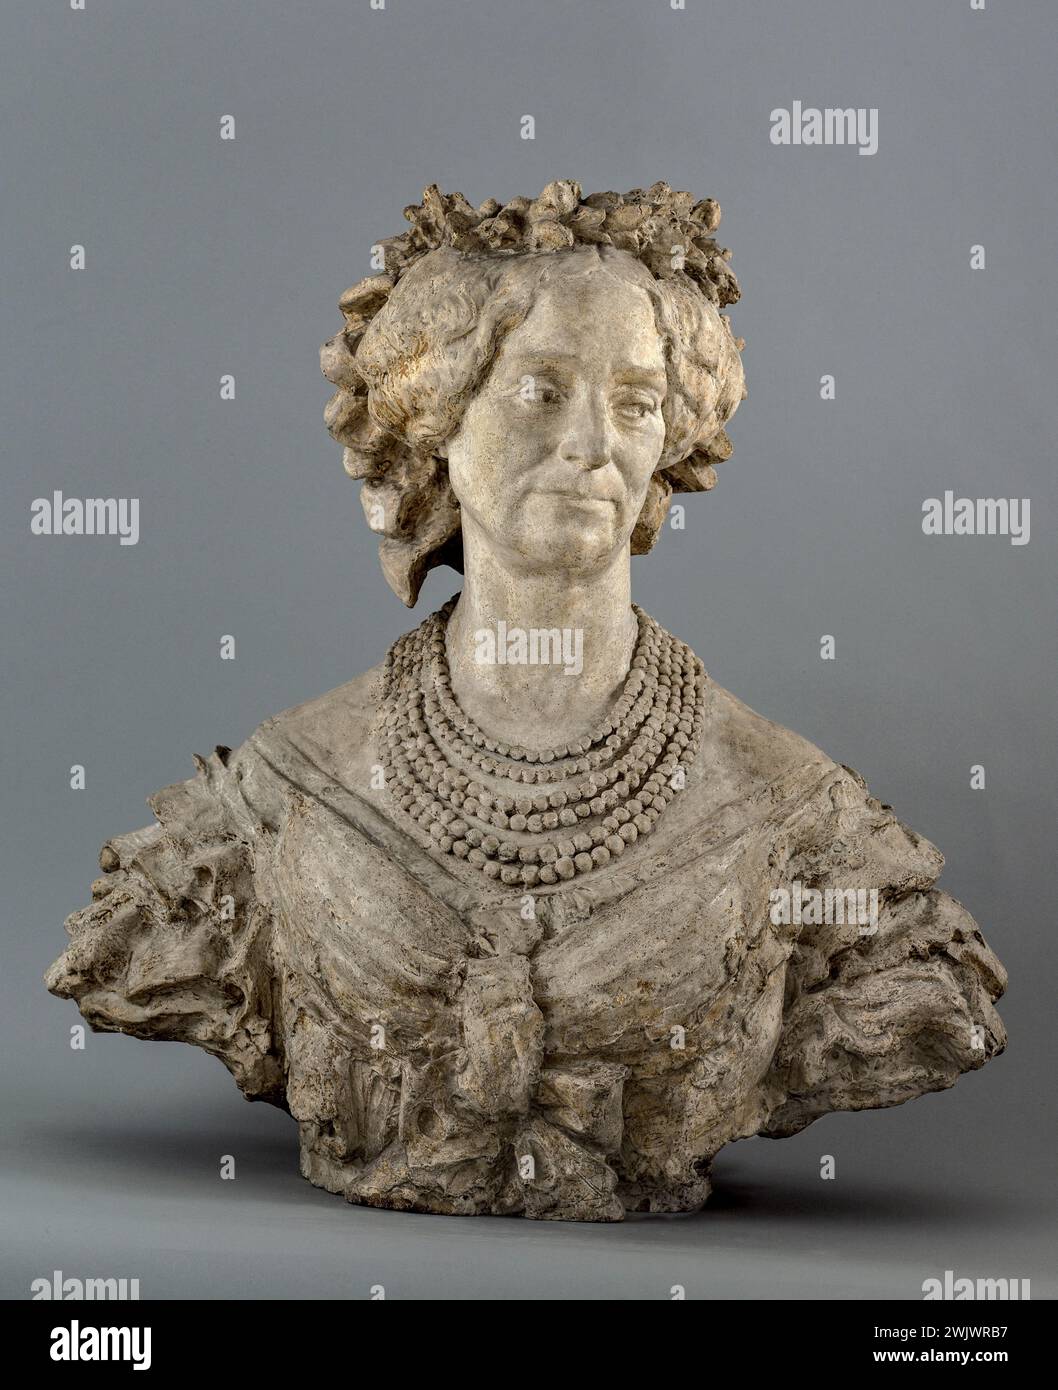 Jean-Baptiste Carpeaux (1827-1875). Bust of the Marquise de la Valette. Patinated plaster. Museum of Fine Arts of the City of Paris, Petit Palais. 79394-2 Bust, necklace, crown, front, French marquise, pattero patina, portrait, 19th 19th 19th 19th 19th 19th century Stock Photo